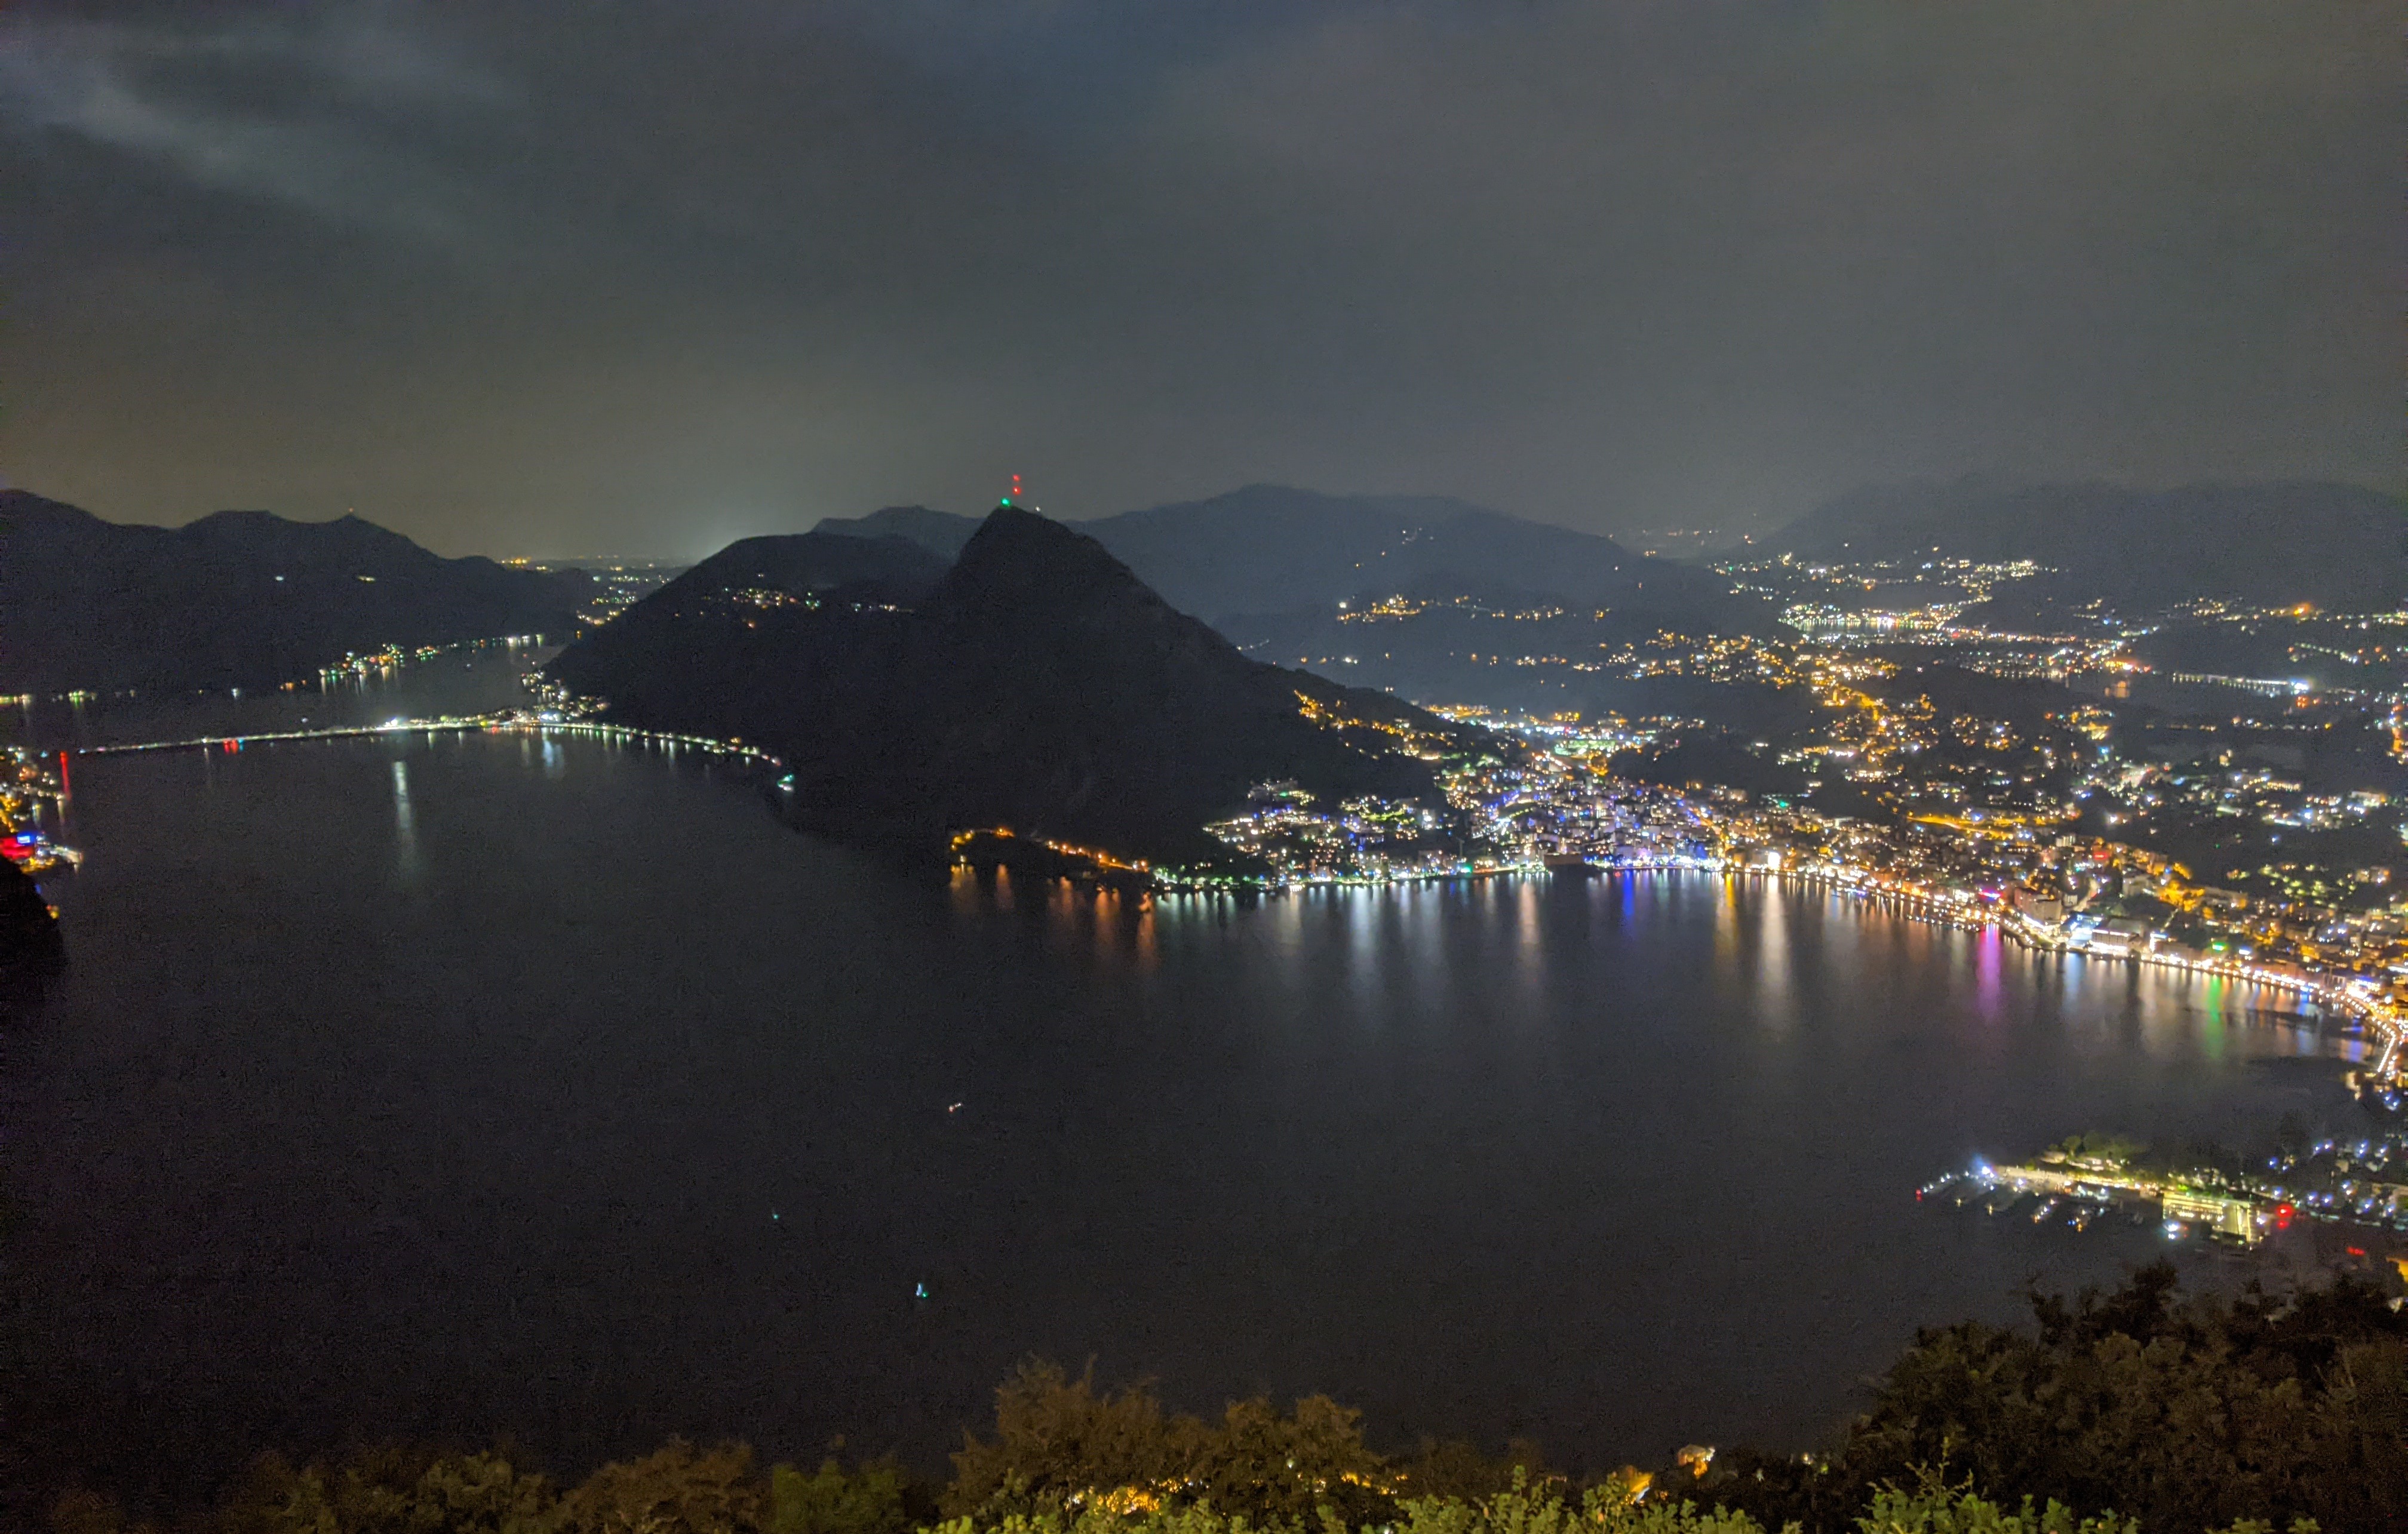 View from the balcony of the restaurant at night, with Lugano visible through all the lights.